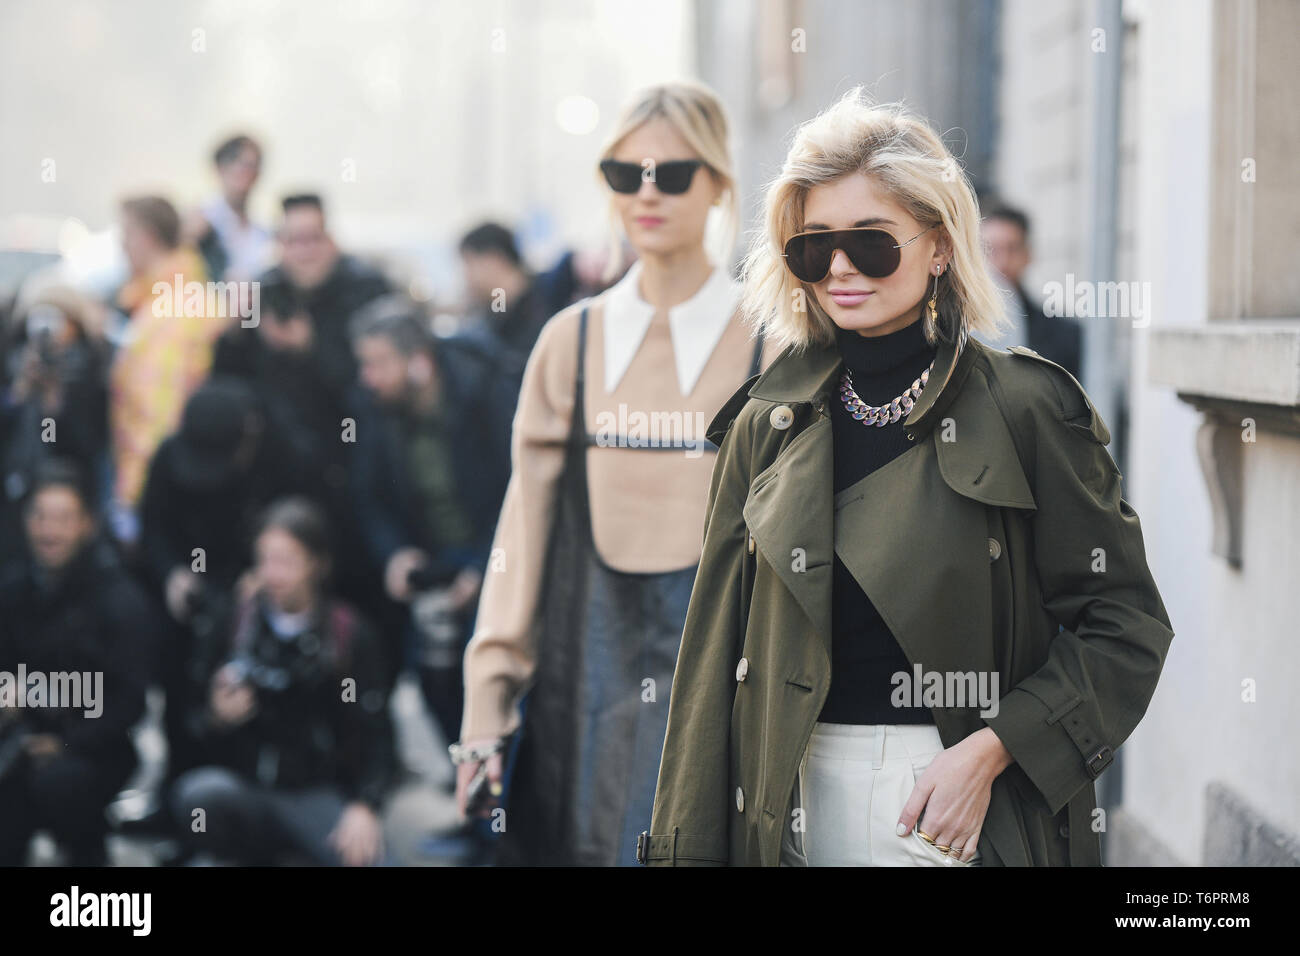 cafeteria strand gave Milan, Italy - February 22, 2019: Street style – Influencer Xenia Adonts  wearing a Burberry coat before a fashion show during Milan Fashion Week -  MFW Stock Photo - Alamy